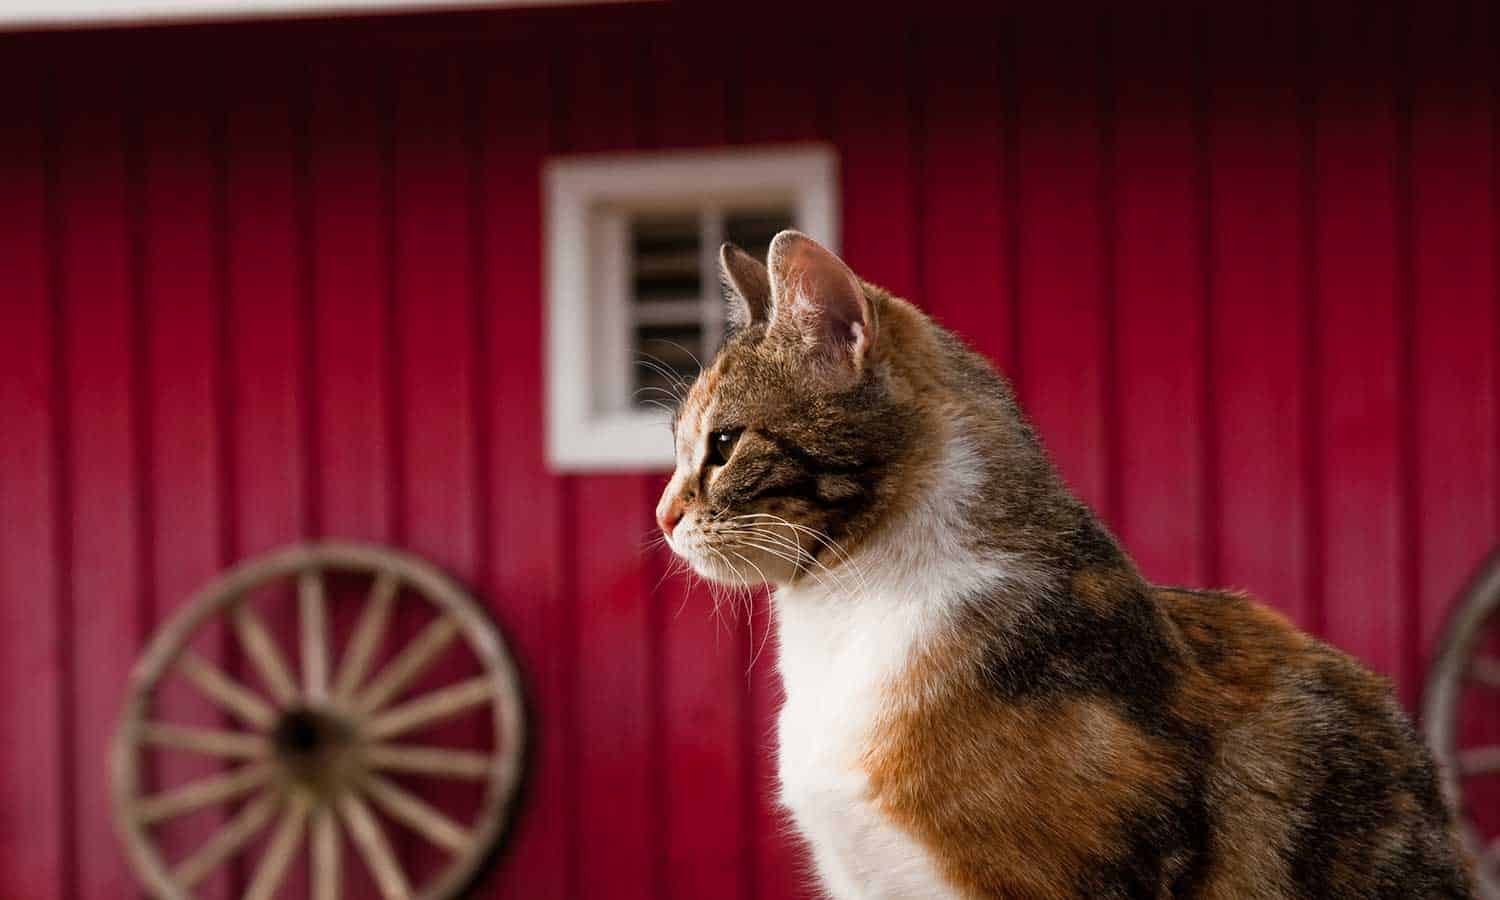 A cat by a barn